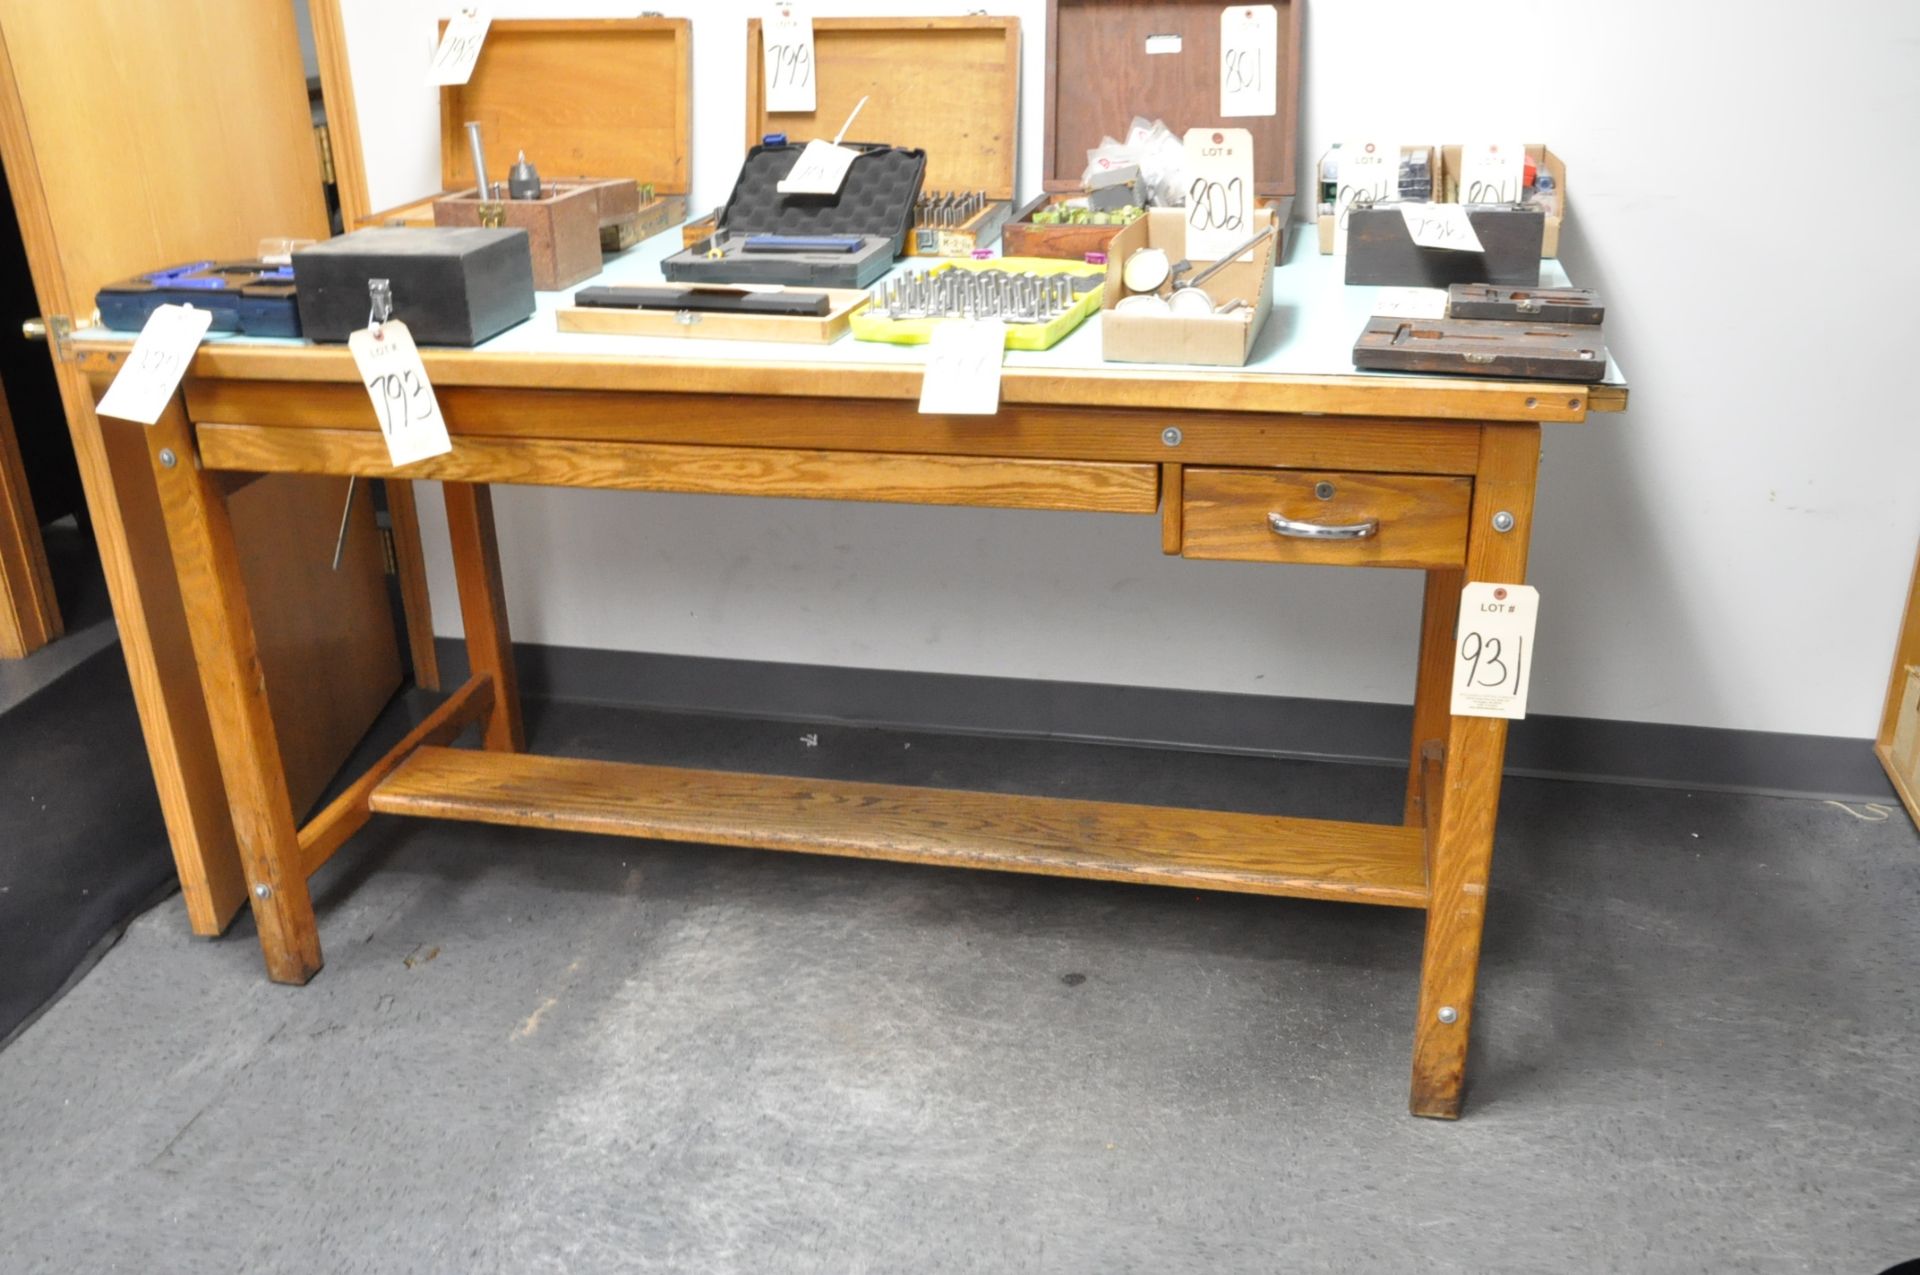 Lot-(2) Drawing Tables, (Contents Not Included), (Not to Be Removed Until Empty) - Image 2 of 2